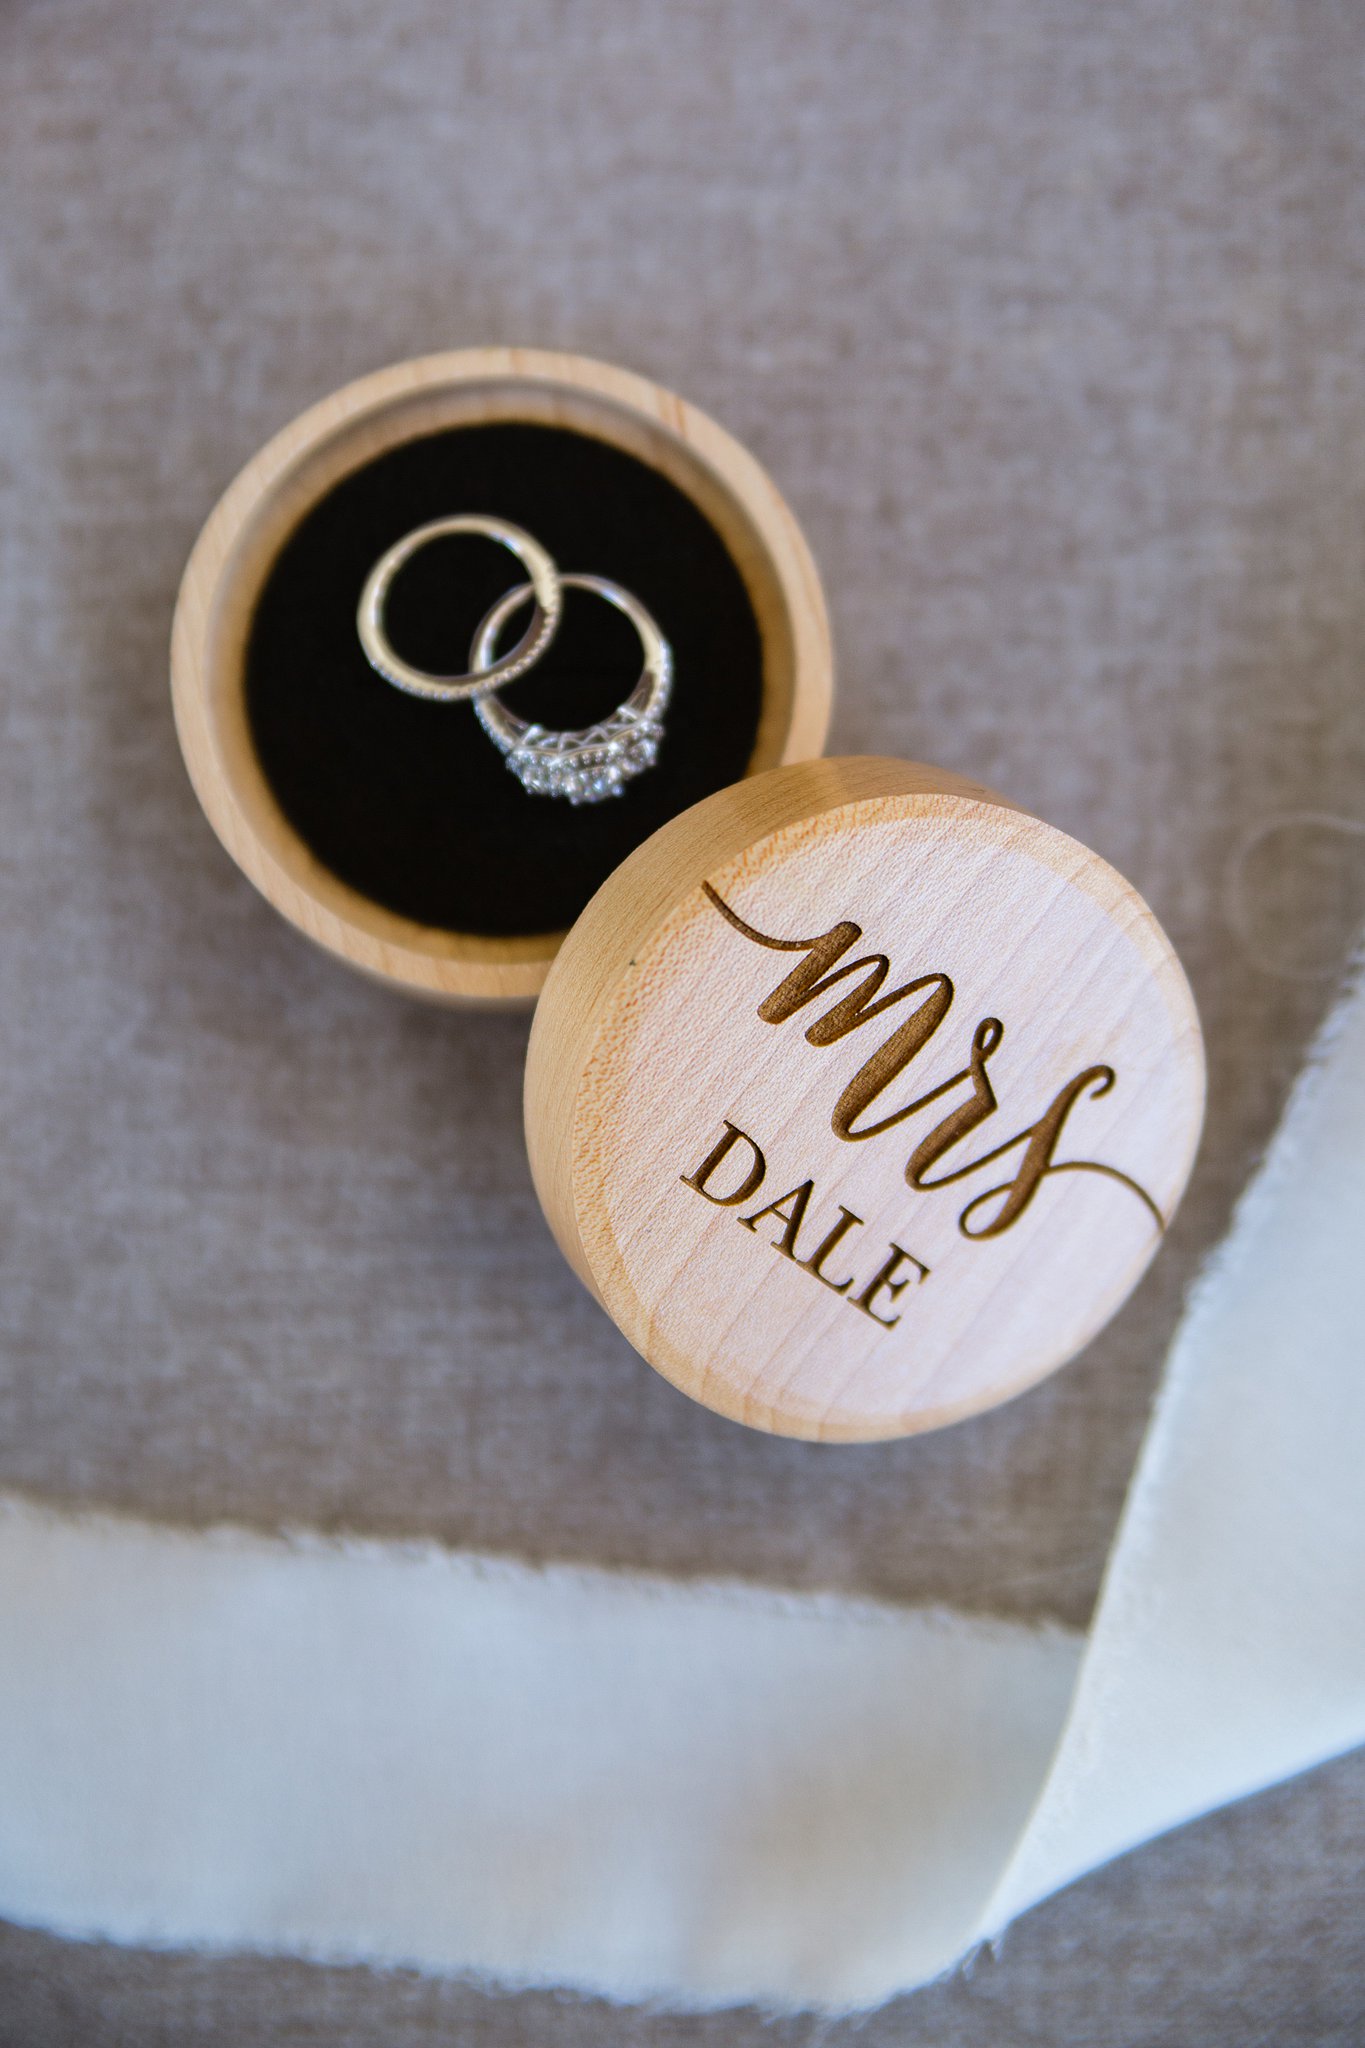 Custom wooden Mrs. ringbox with wedding rings by PMA Photography.